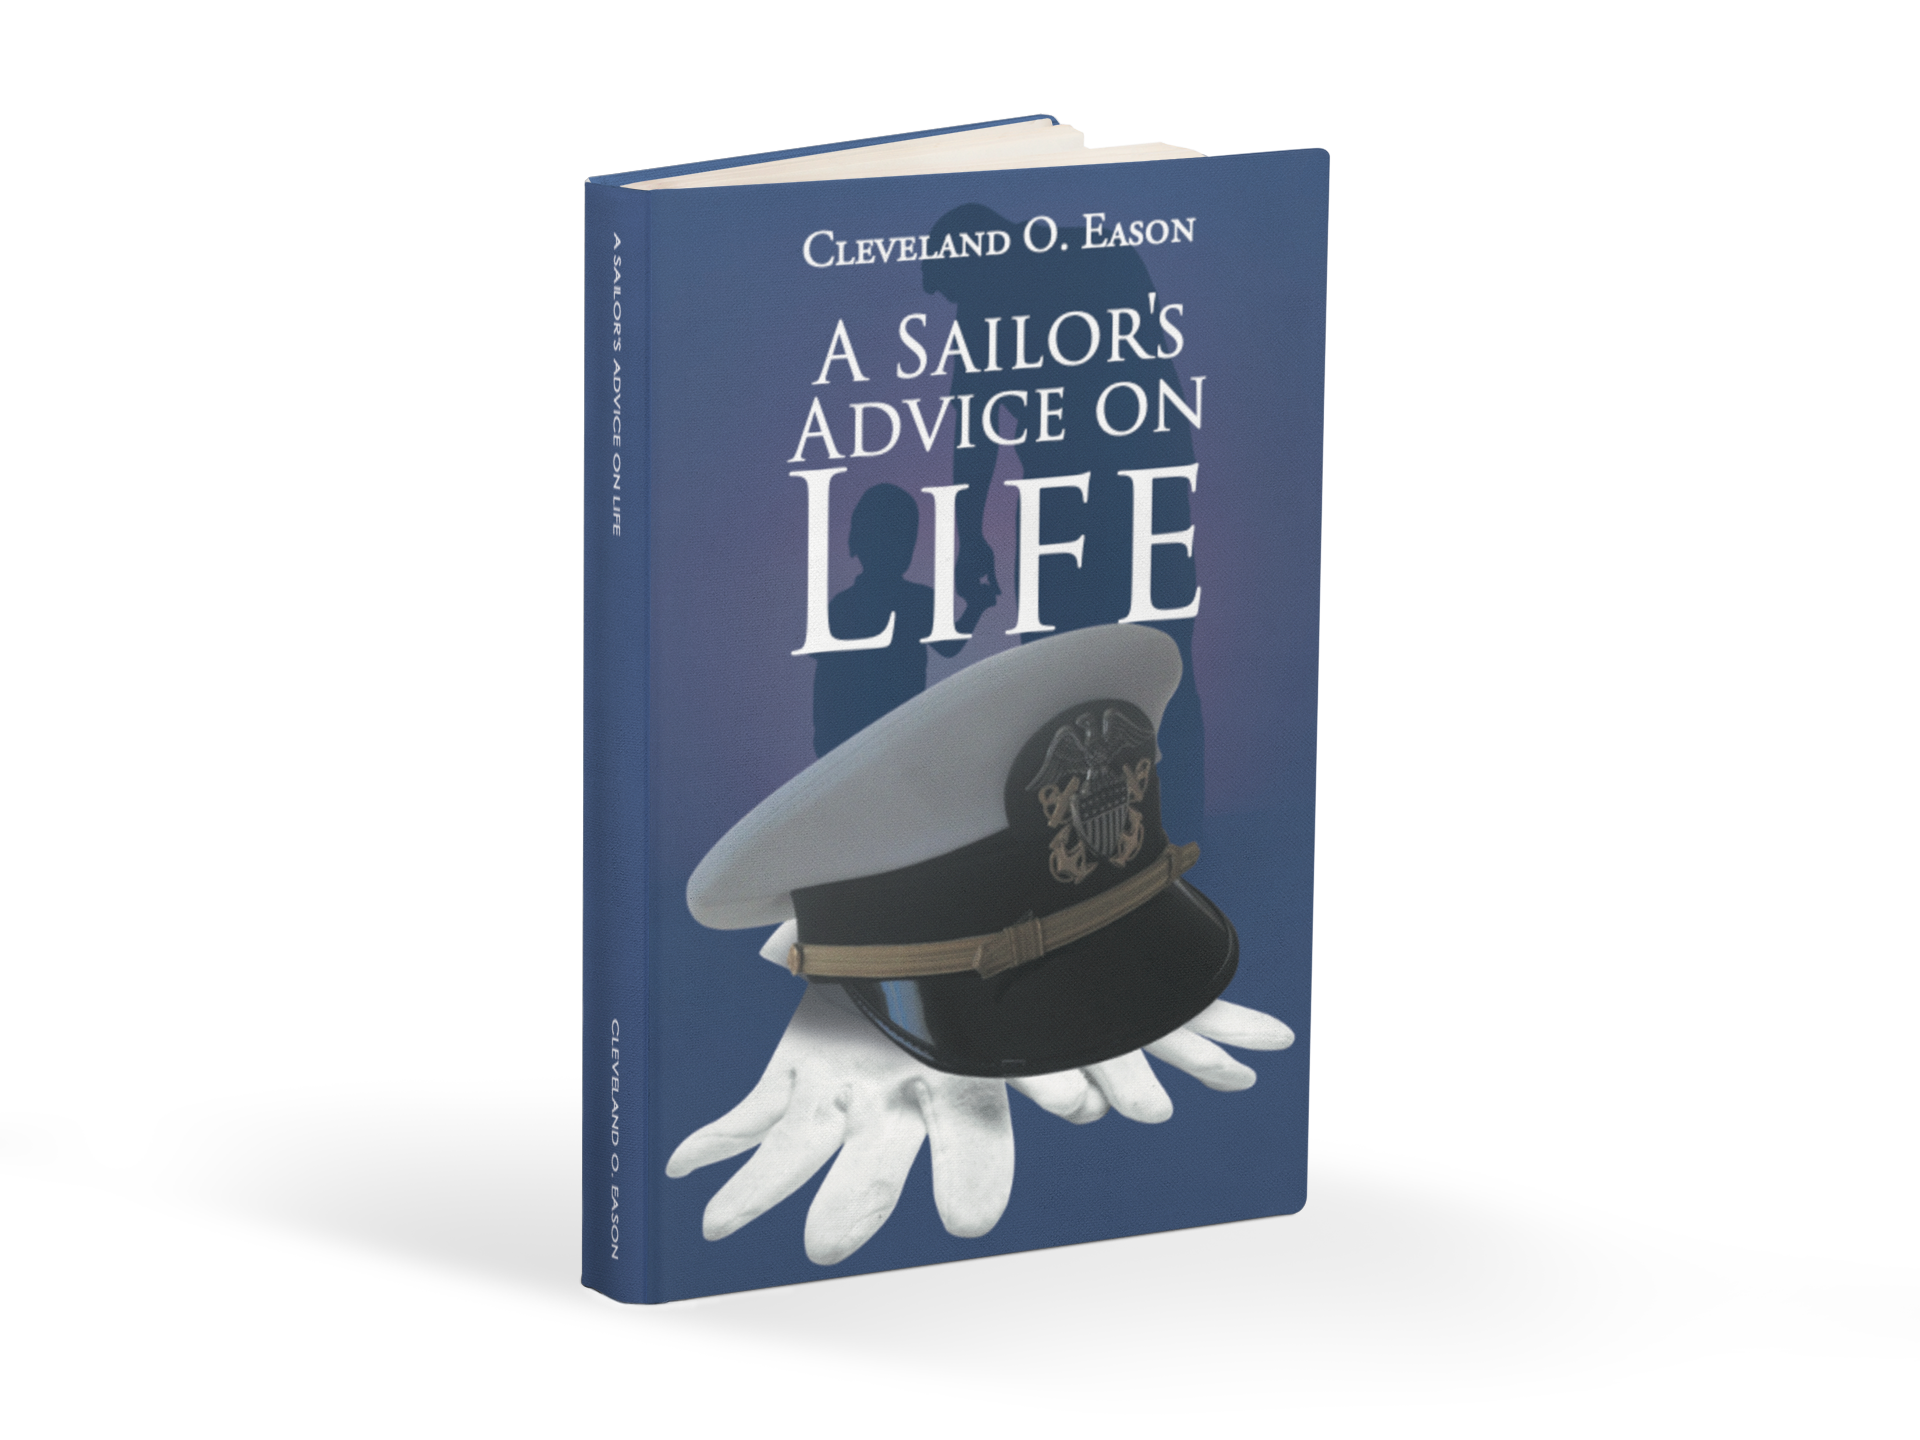 Navy Veteran, Cleveland O. Eason, Shares an Inspired Approach to Achieving One's Fullest Potential in Self-Help Book, A Sailor’s Advice on Life